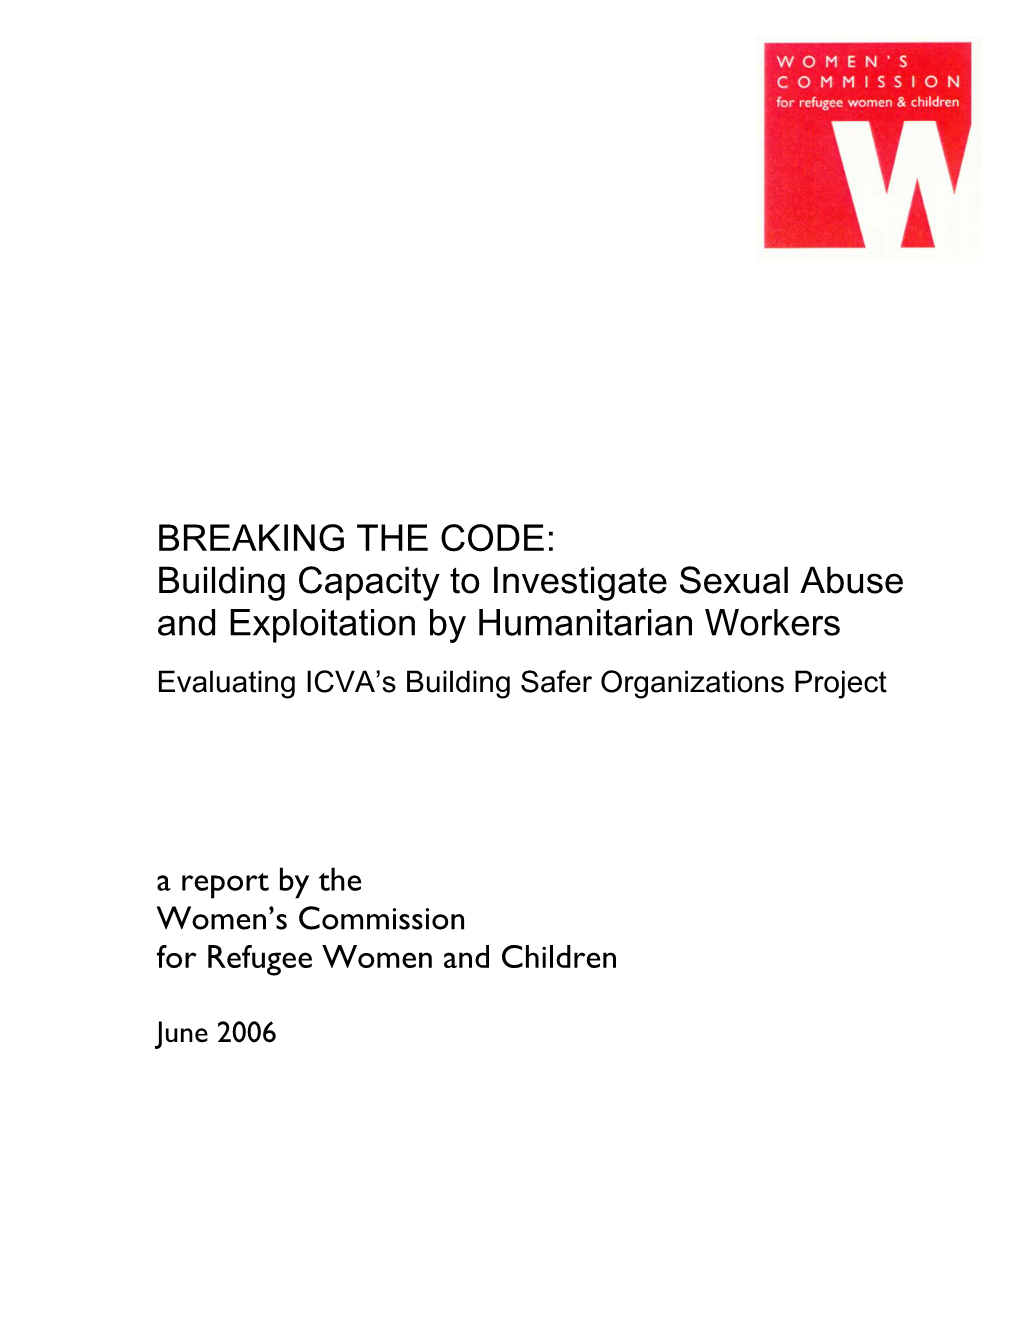 Building Capacity to Investigate Sexual Abuse and Exploitation by Humanitarian Workers